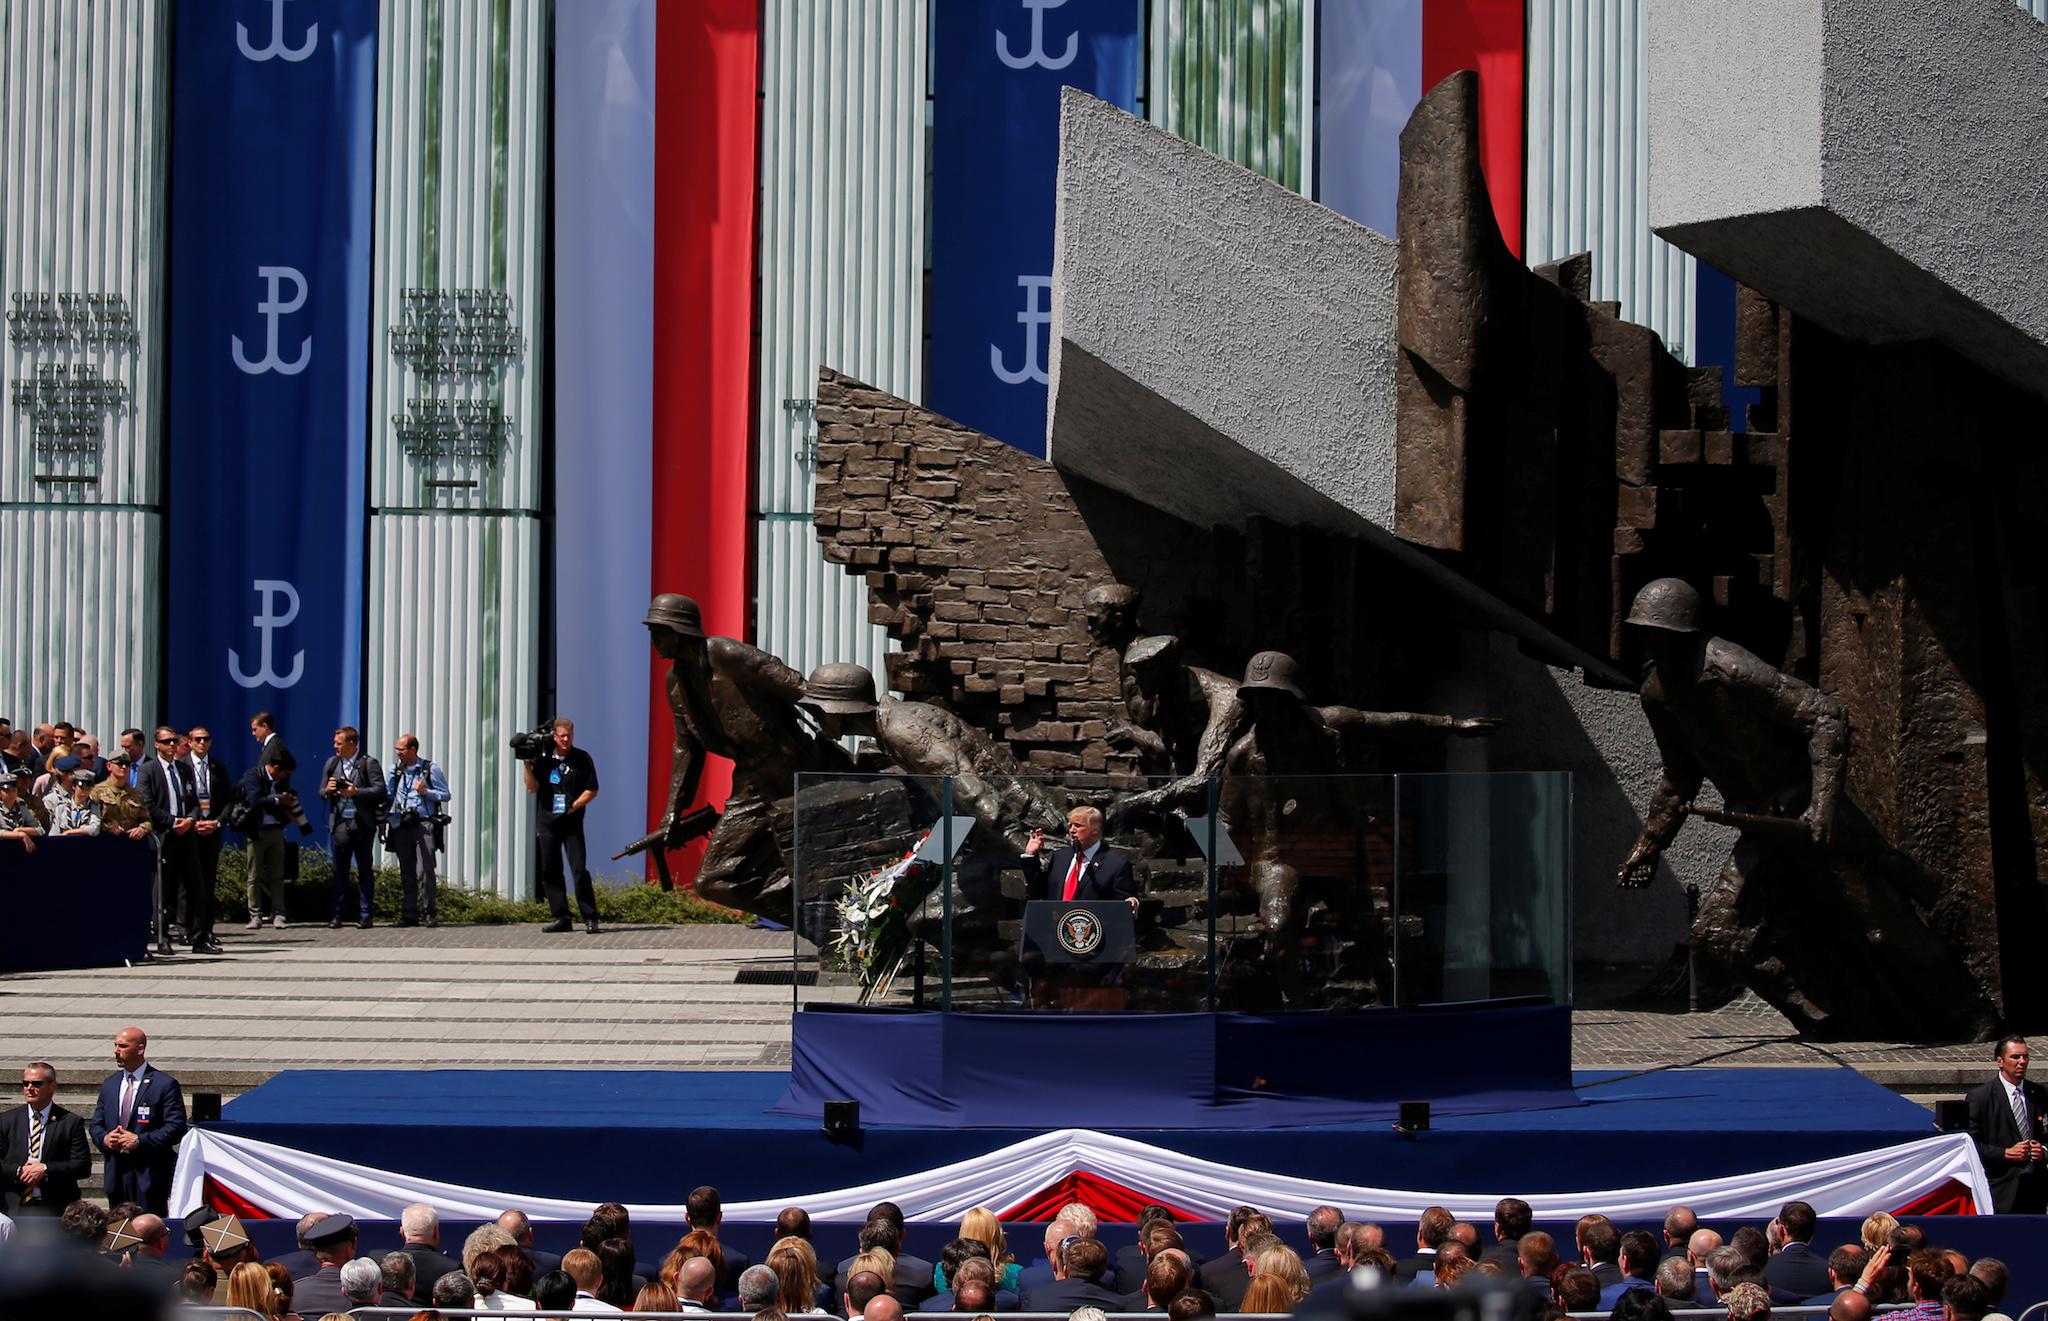 U.S. President Donald Trump gestures during his public speech in front of the Warsaw Uprising Monument at Krasinski Square, in Warsaw, Poland